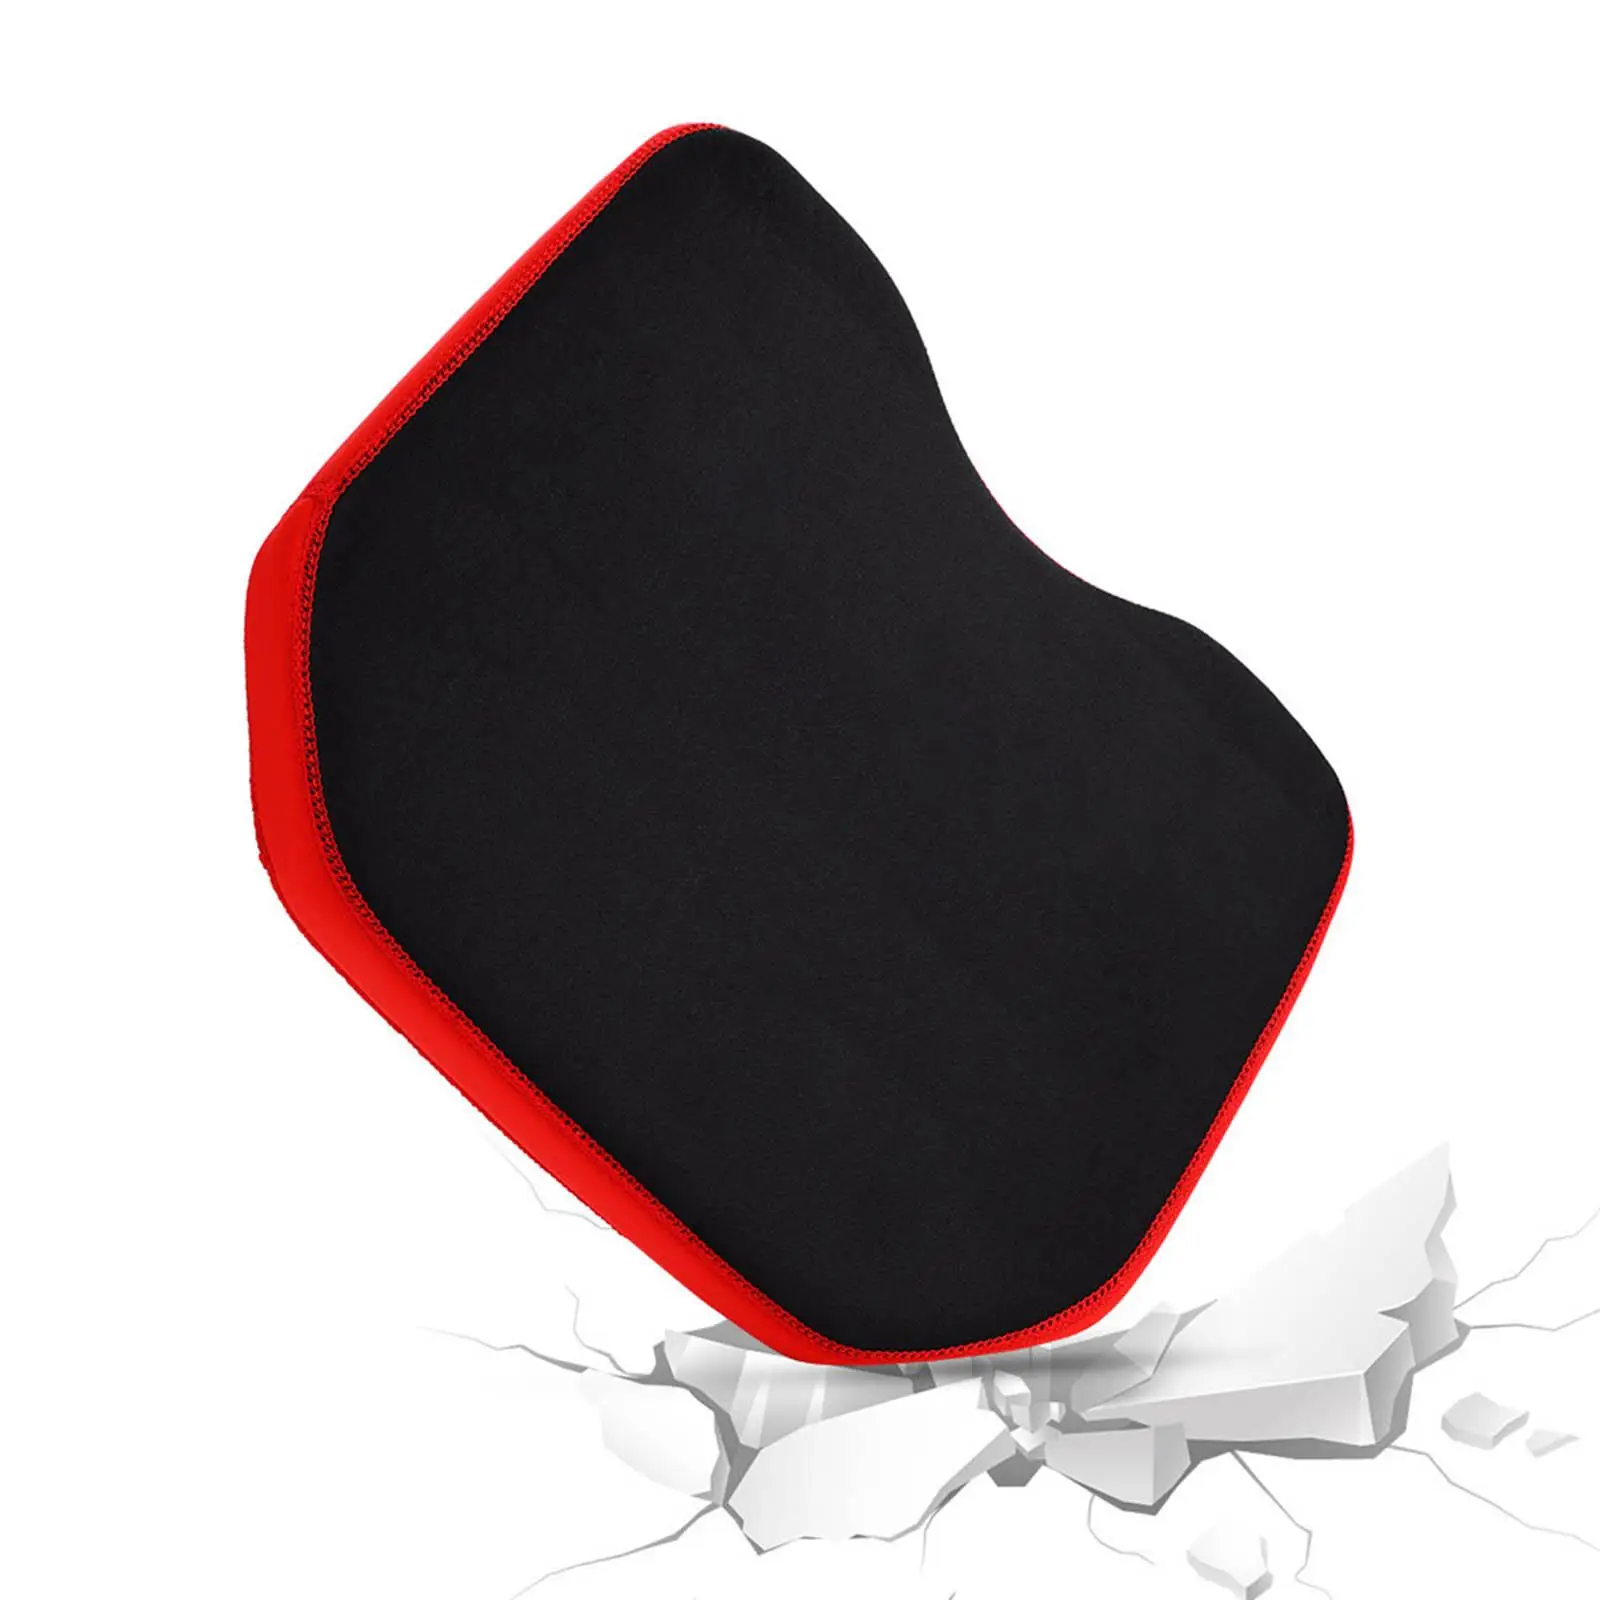 Boat Seat Cushion  Detachable Seat Waterproof Sit Soft Accessory Boat Cushions Rowing Boat Boat Bolster  Camping Outdoor Boats